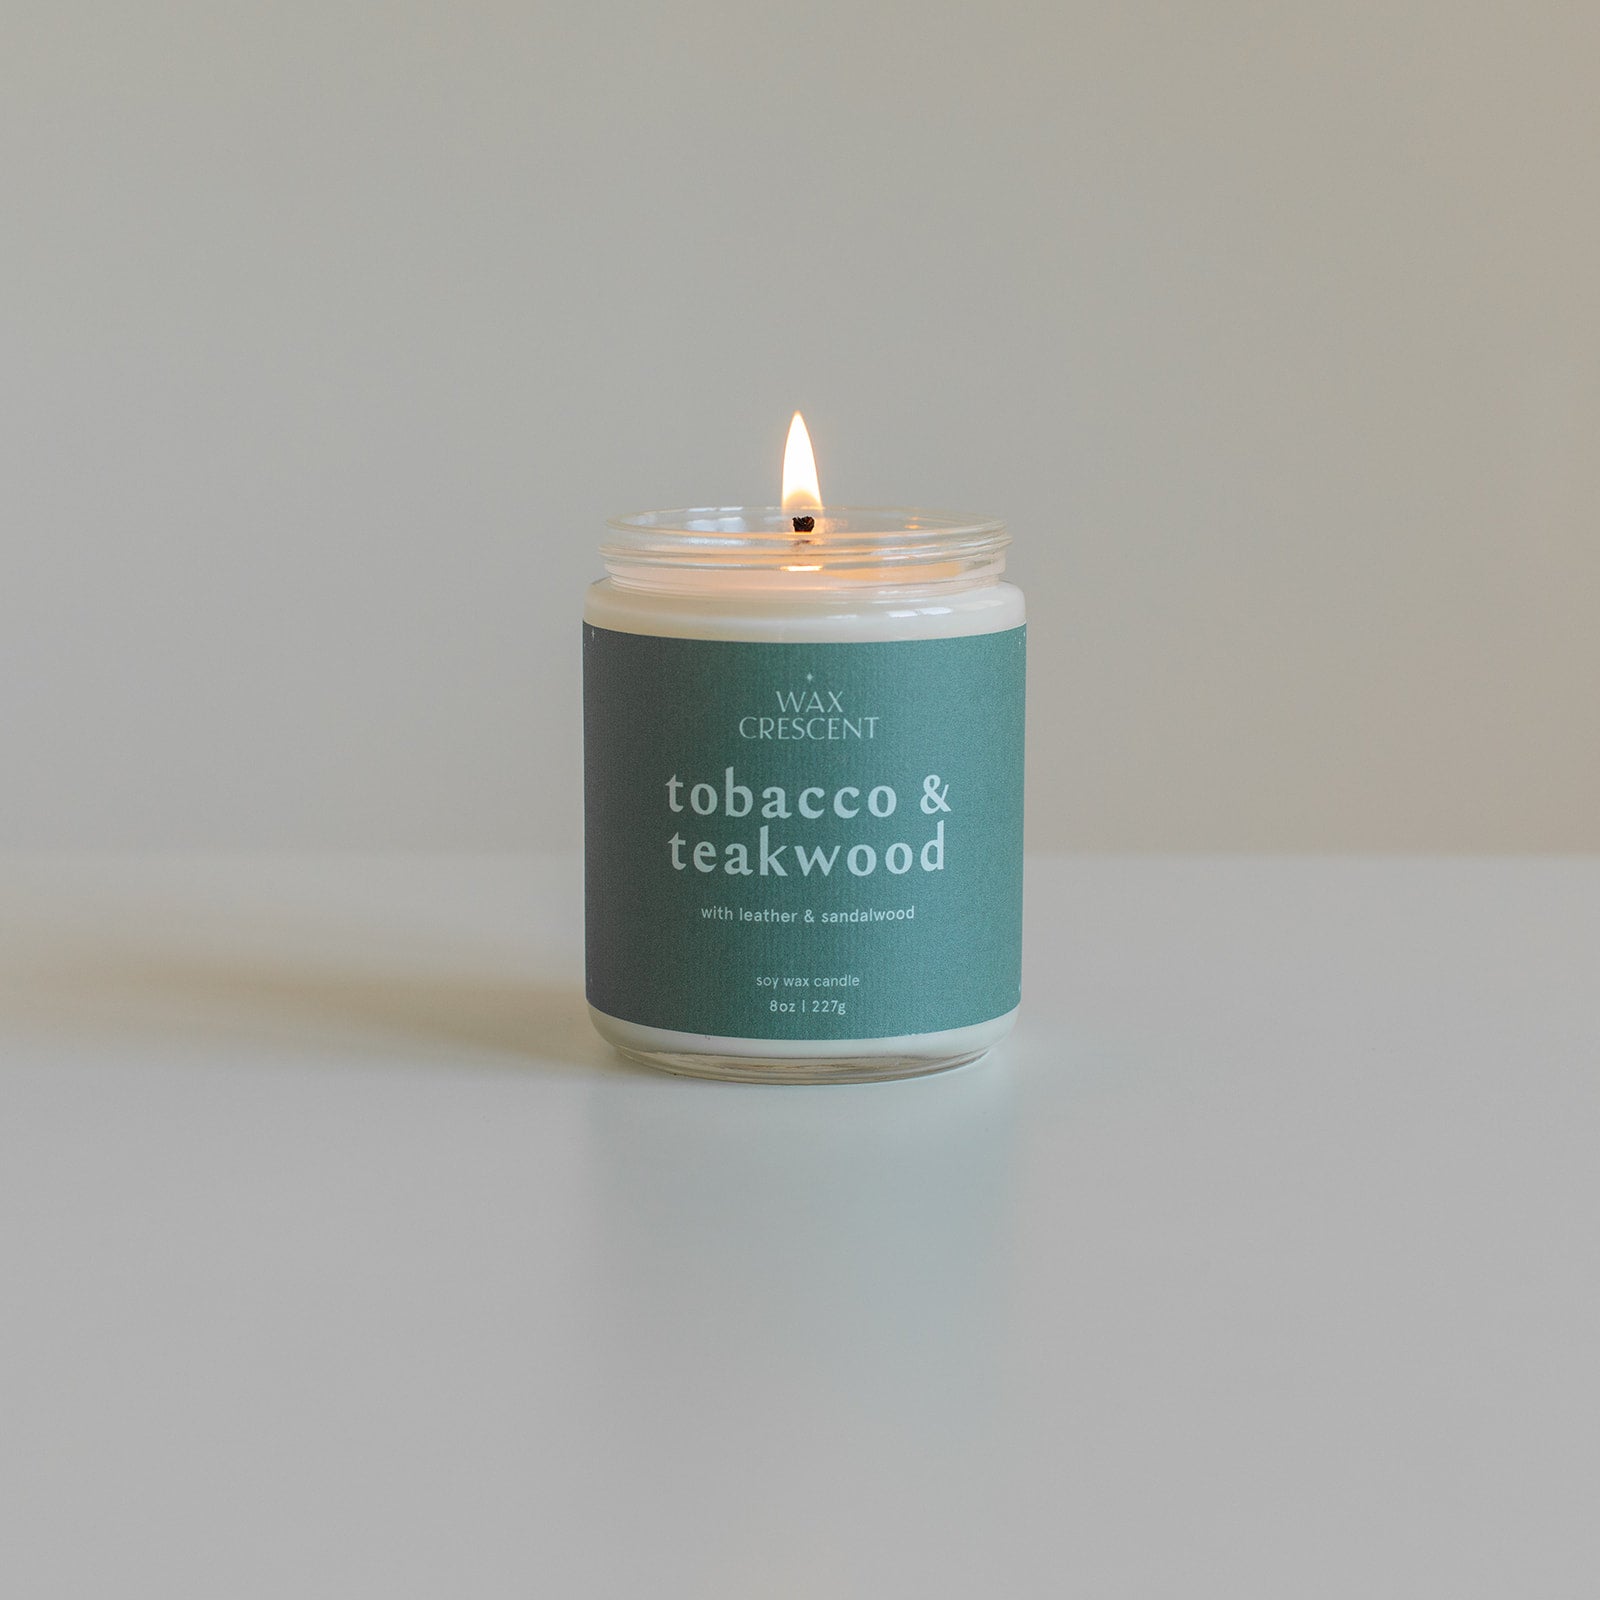 TEAKWOOD ESCAPE Wood Wick Candle 10 oz – The Scented Market